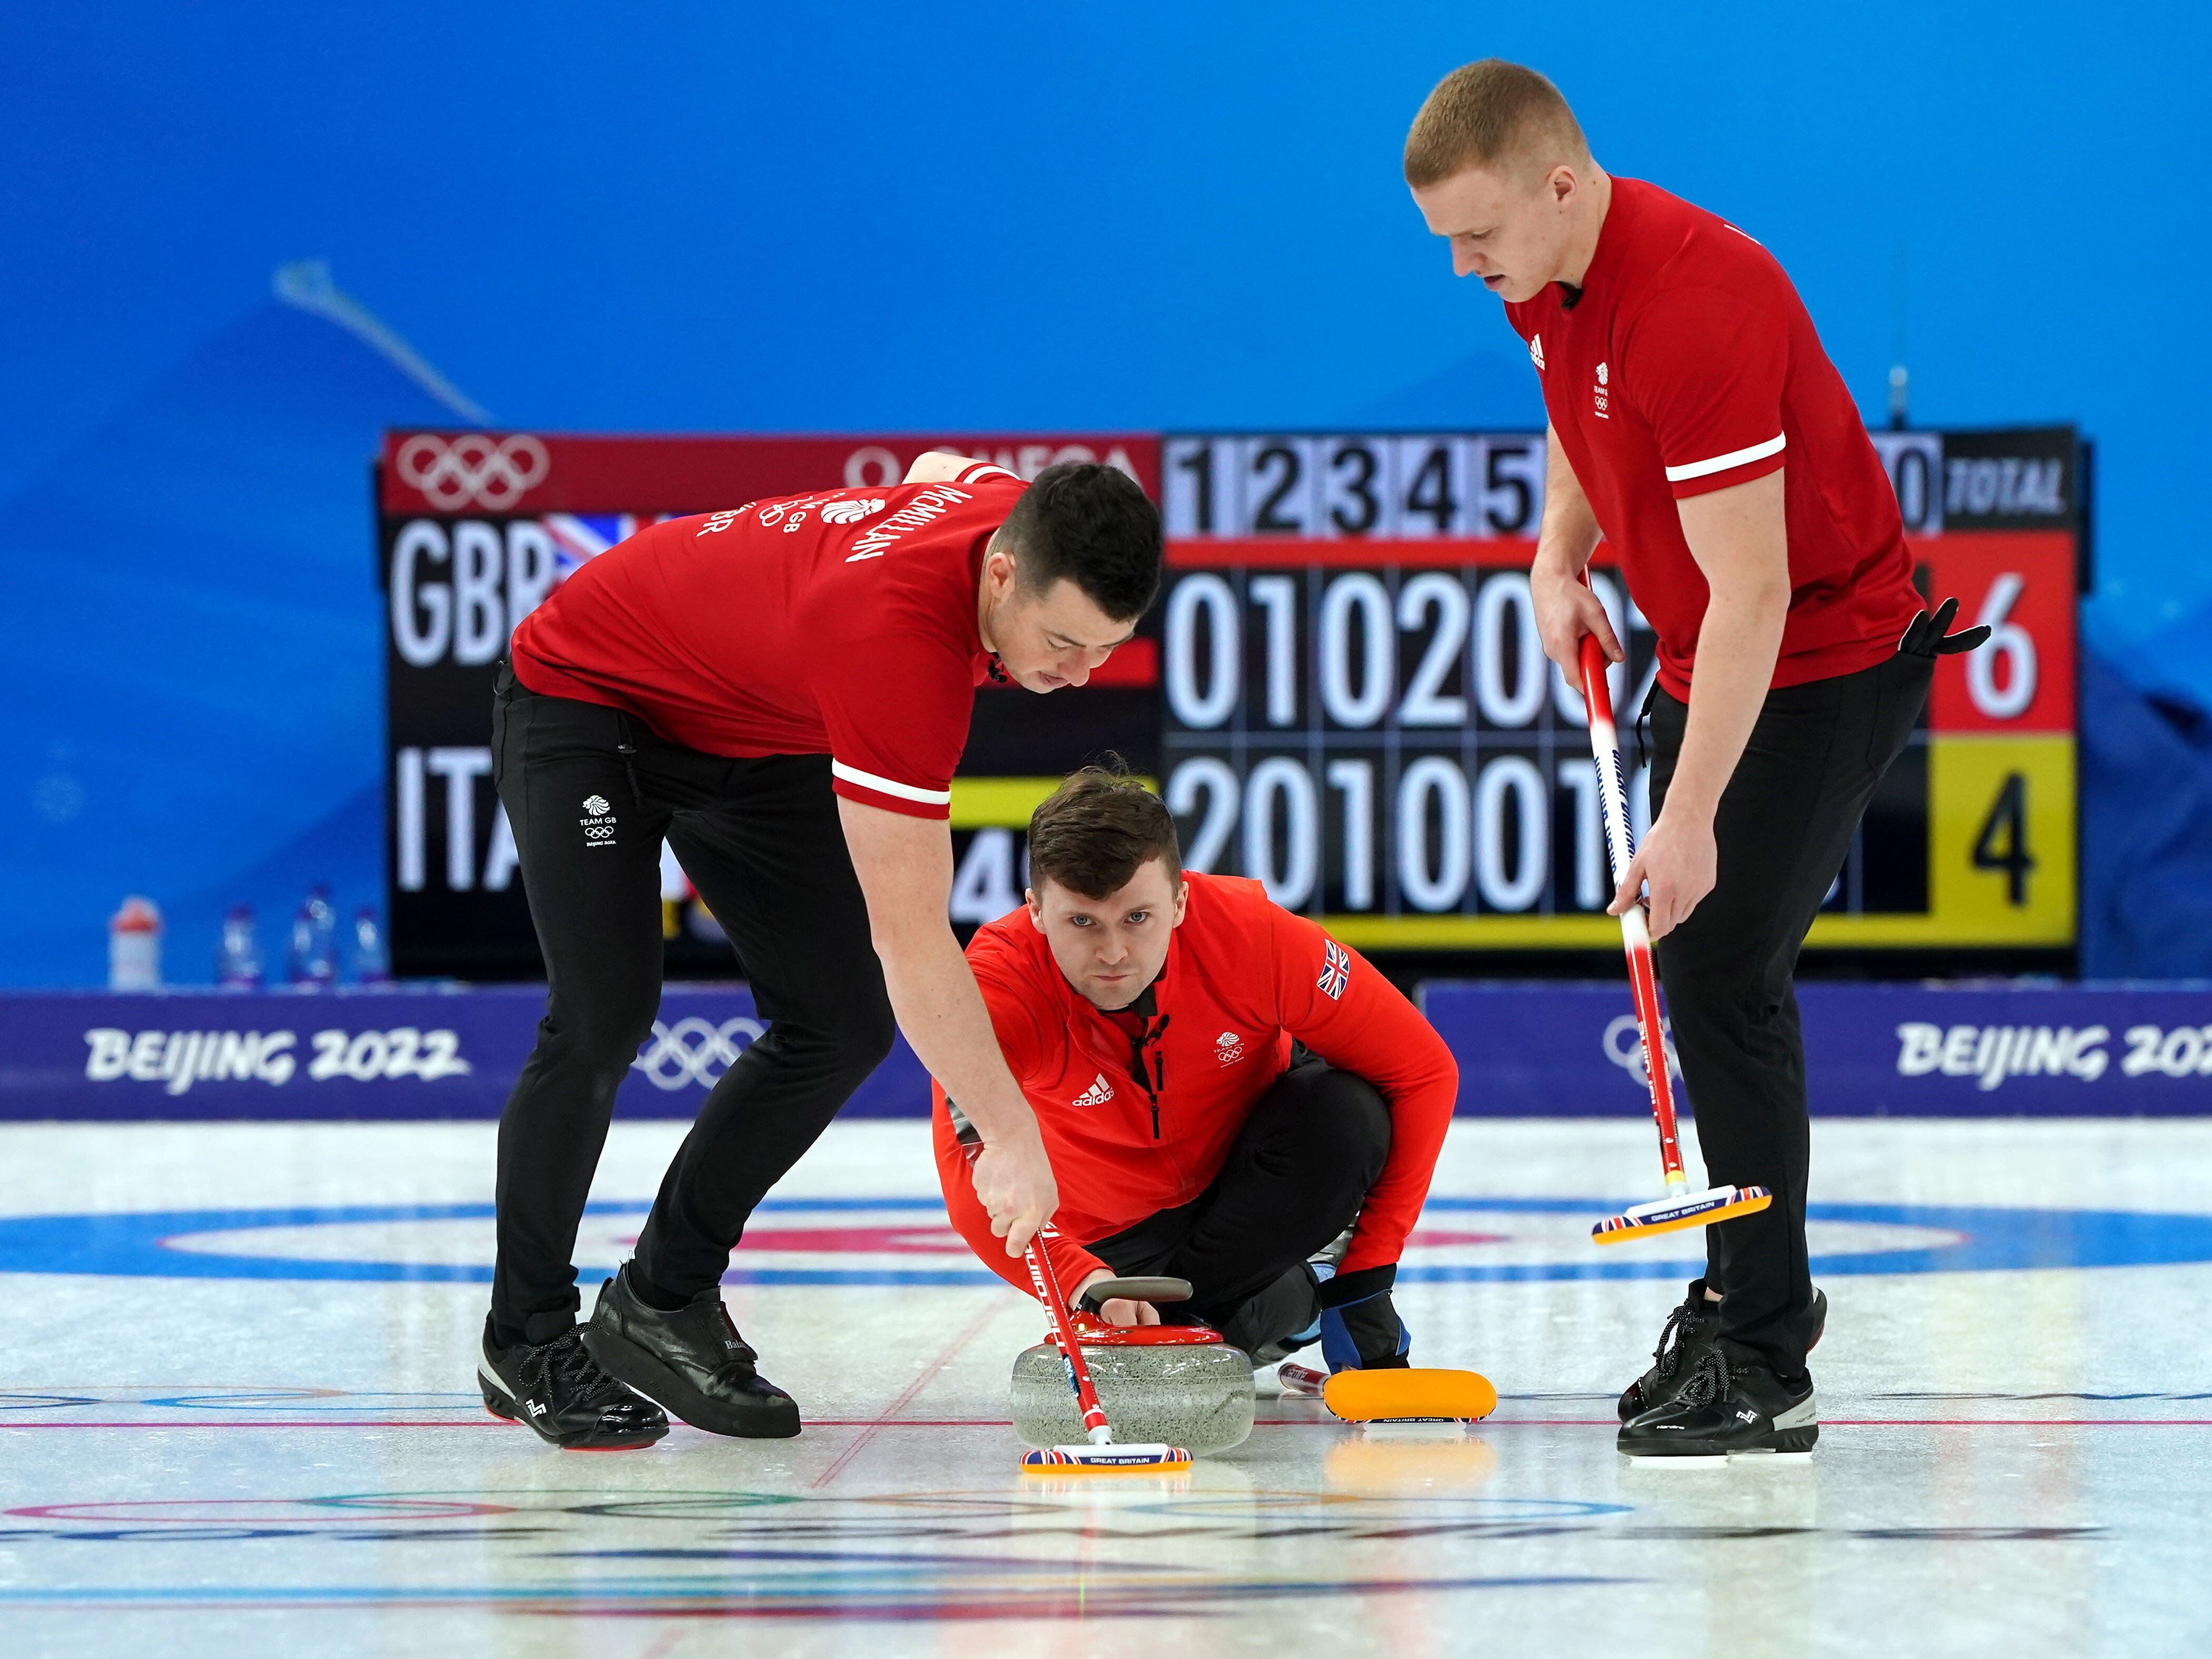 Contrasting fortunes for GB’s men and women as team curling round-robins begin